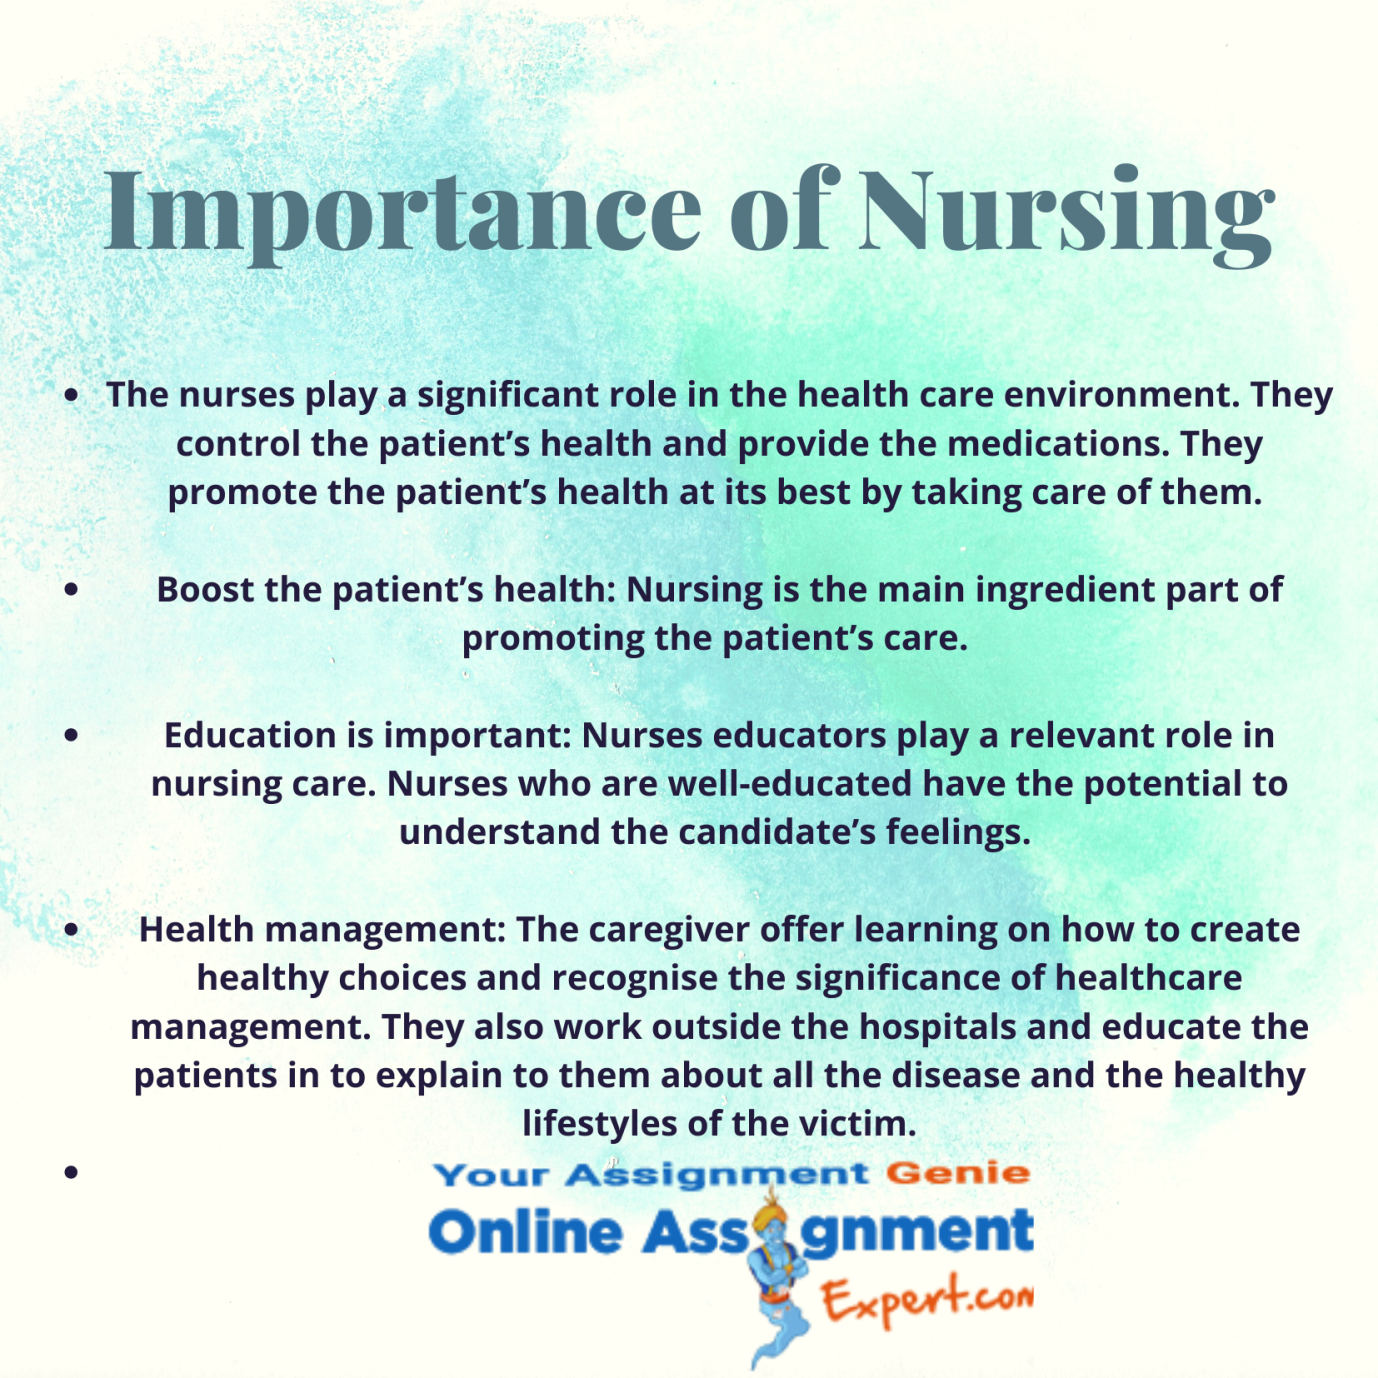 foundations-of-nursing-practices